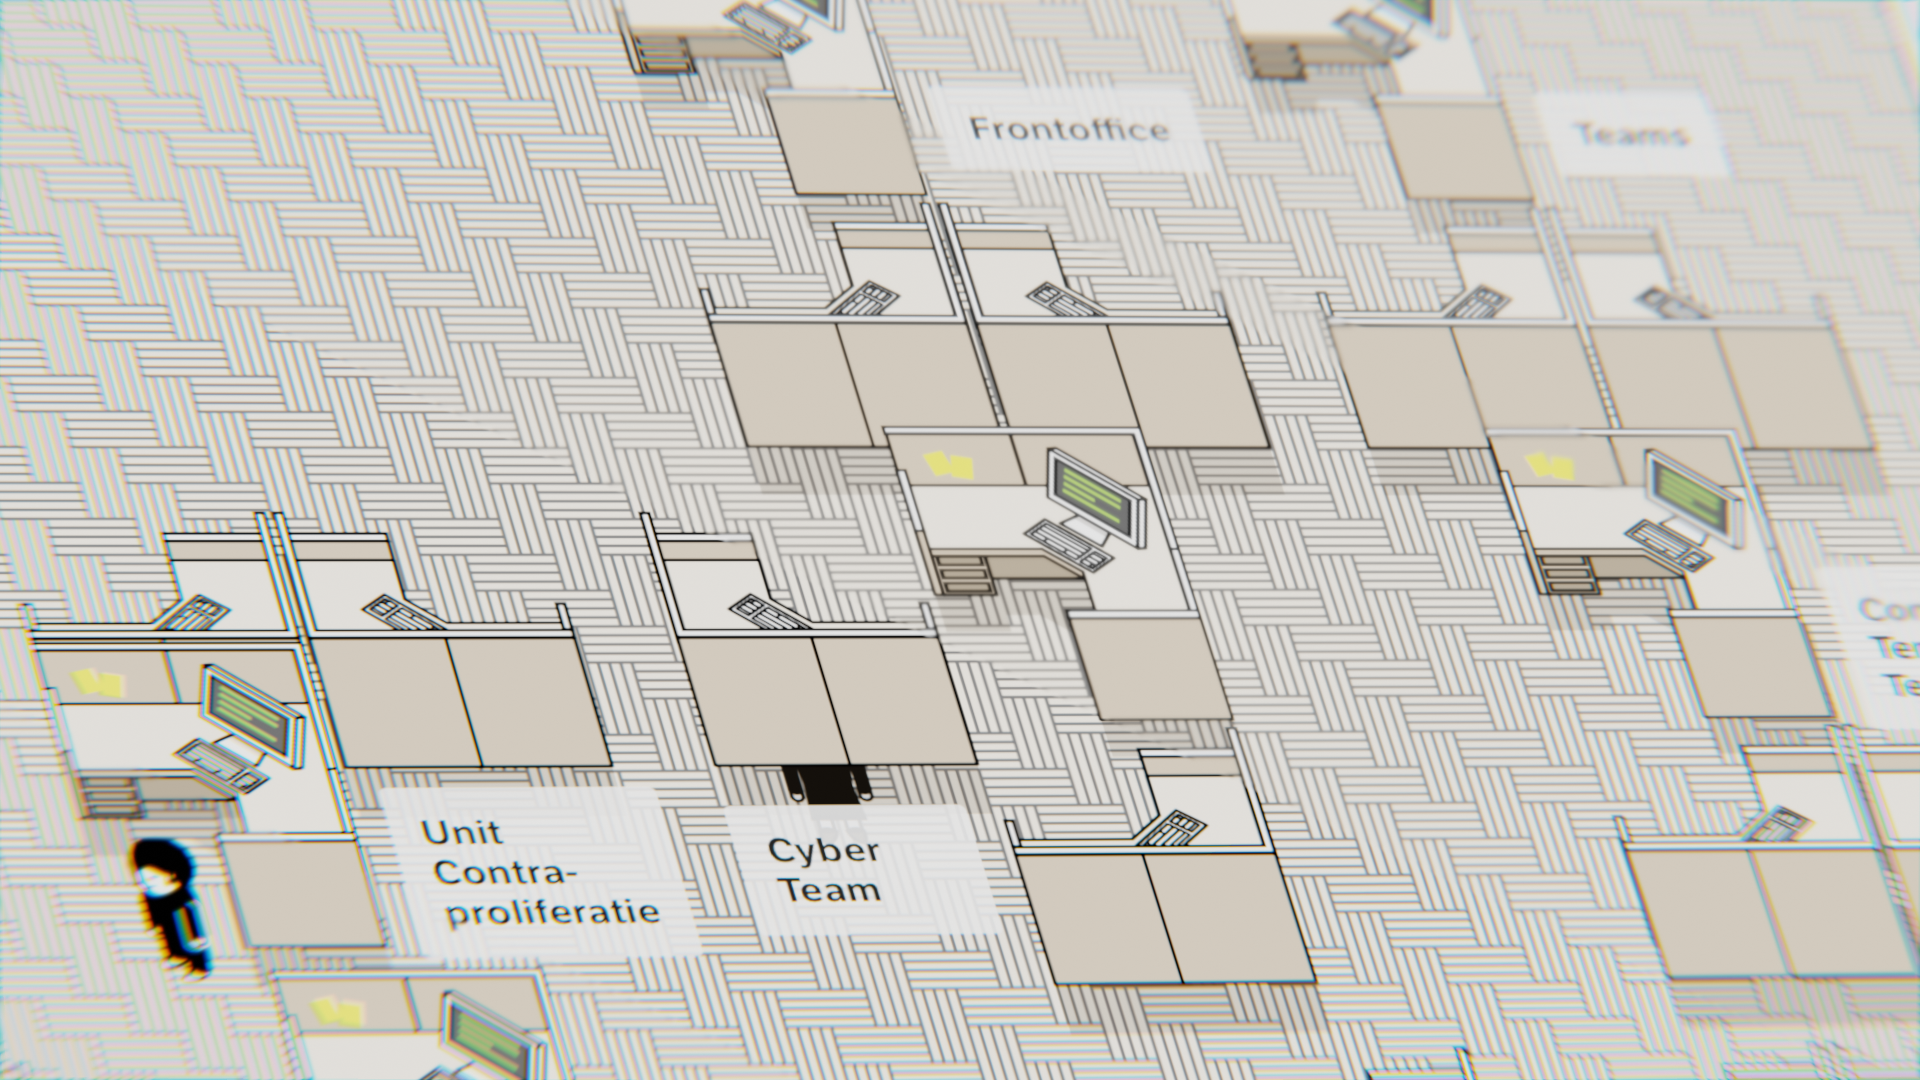 An in-depth interactive visualized story about the inner workings of the dutch spy agency.